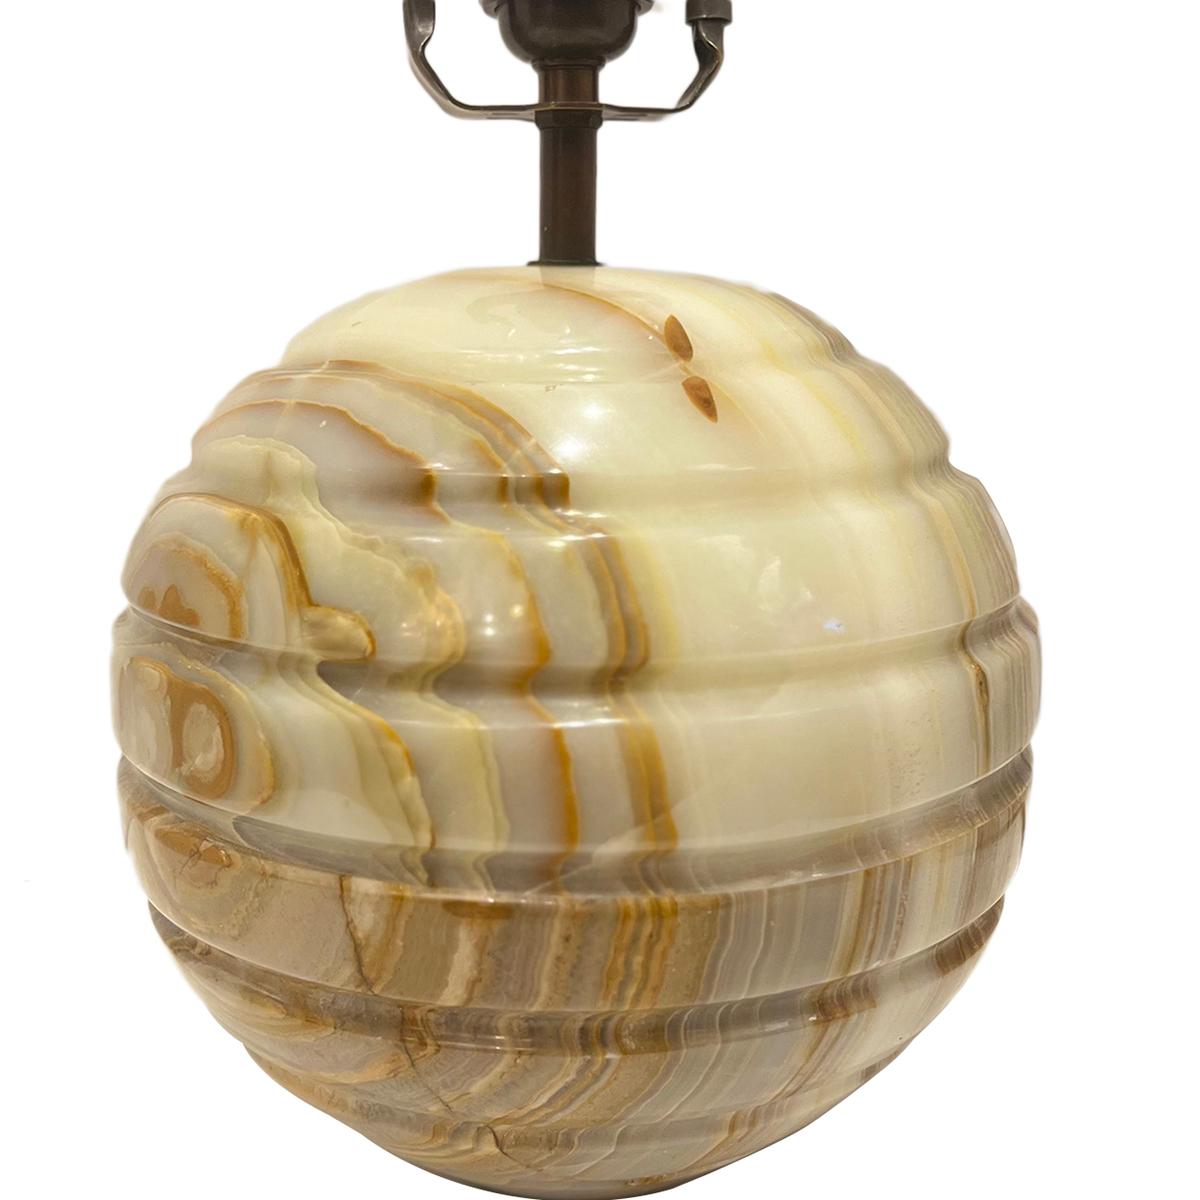 A circa 1950s Italian carved onyx table lamp.

Measurements:
Height of body: 9